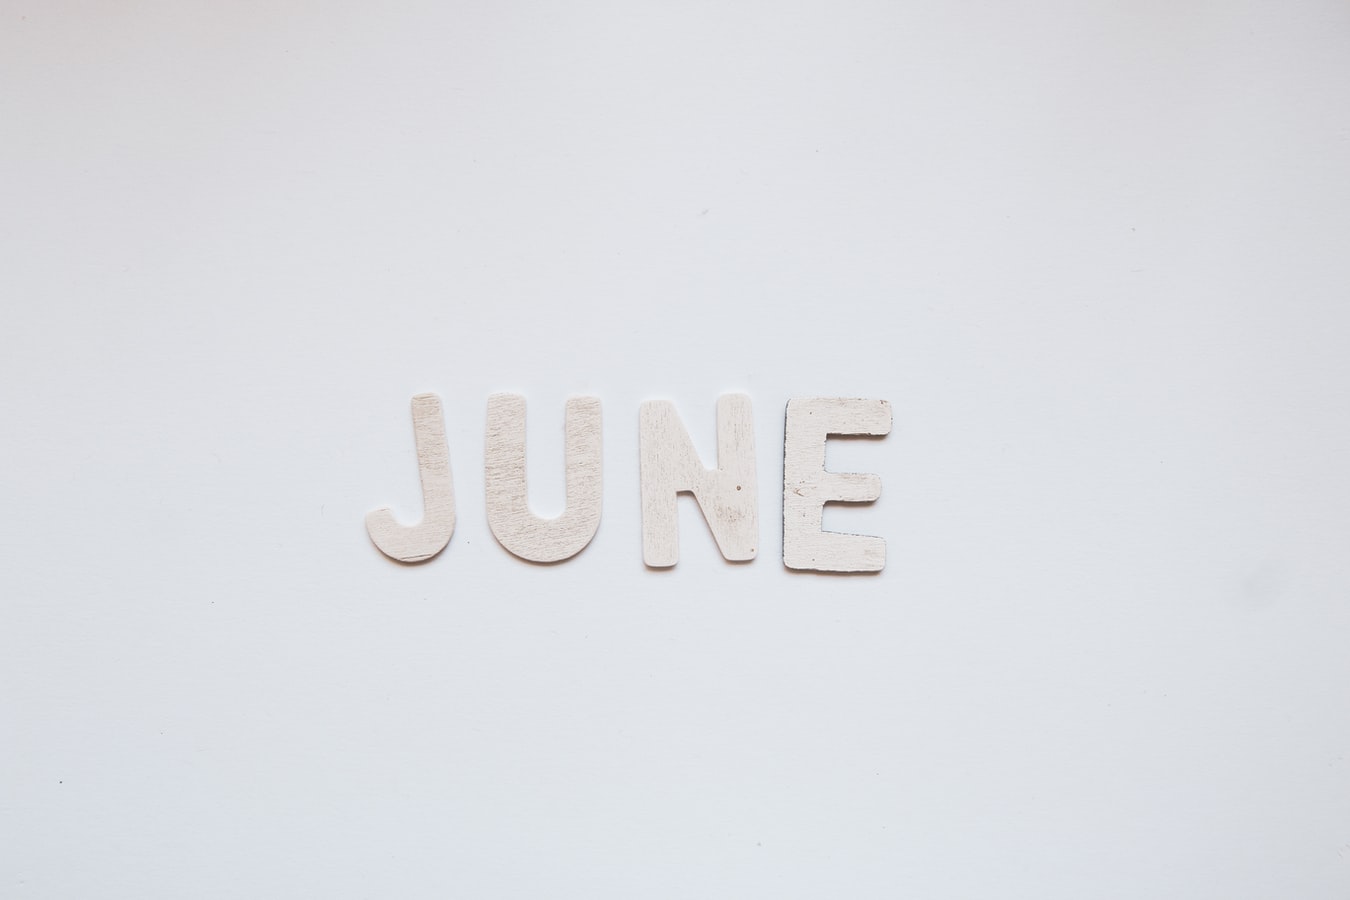 'June' written using paper cut letters, over a white background